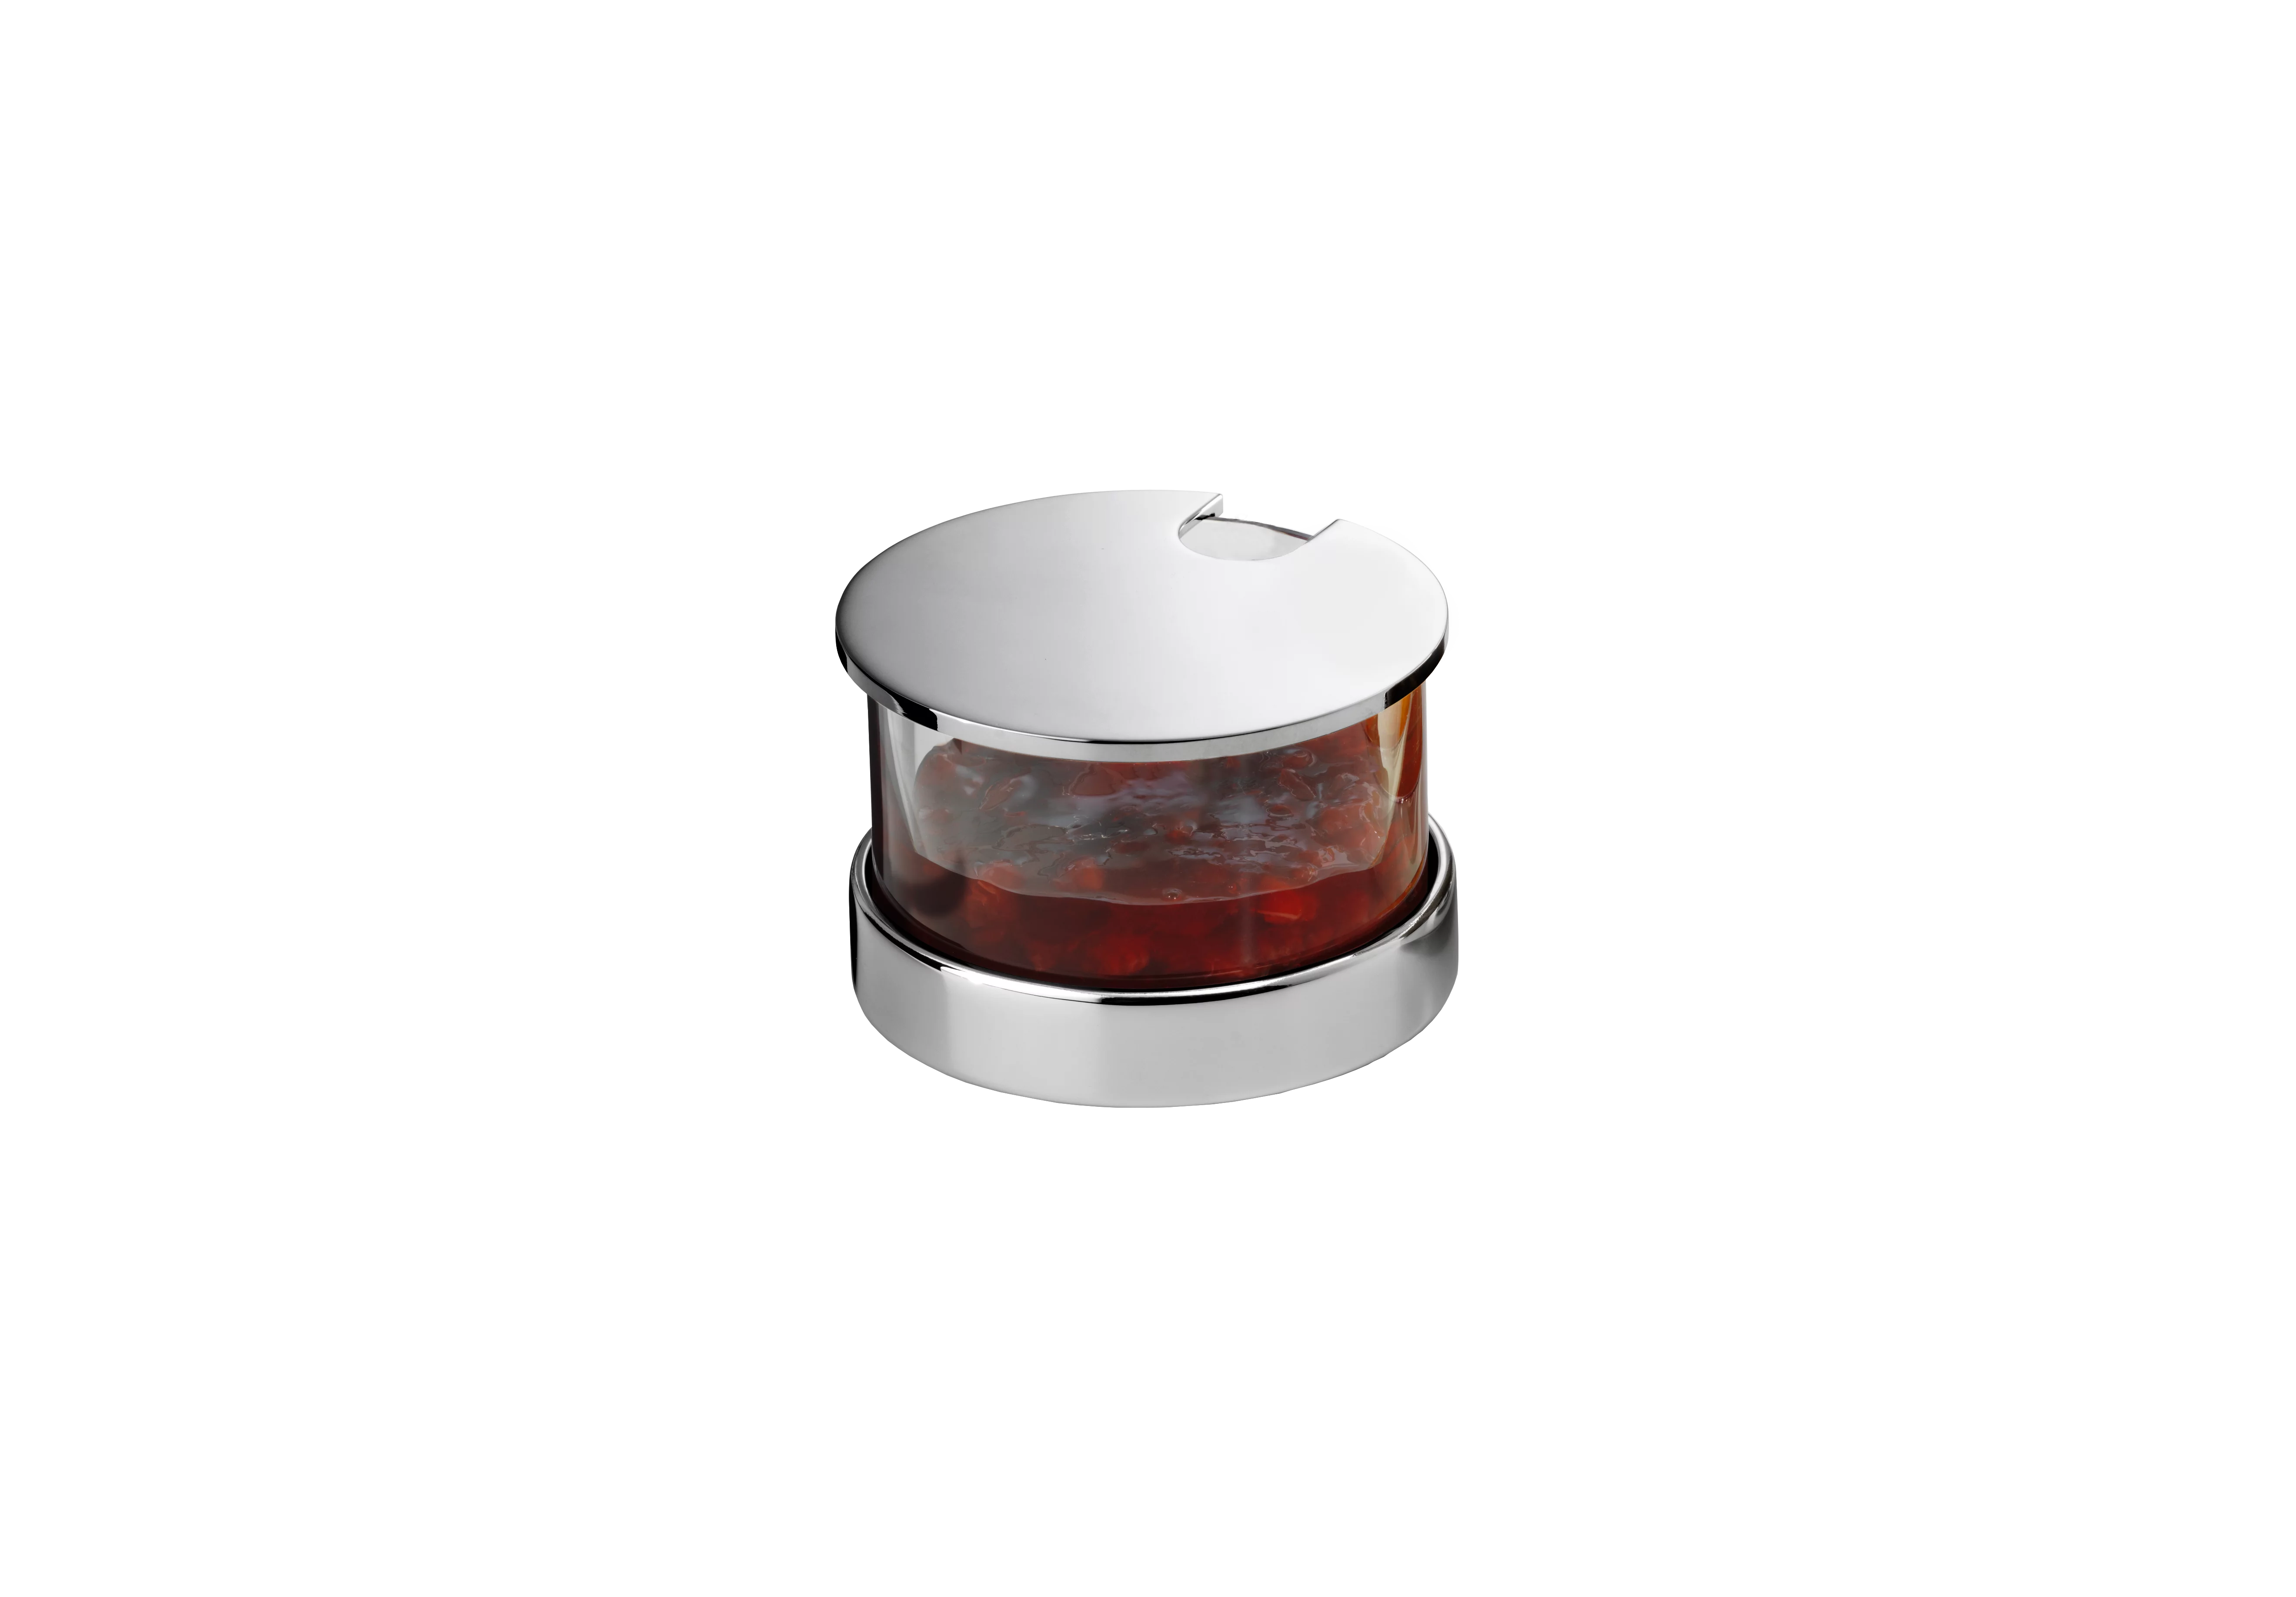 Jam server with silver-plated lid, height 5,8cm (90g silverplated)